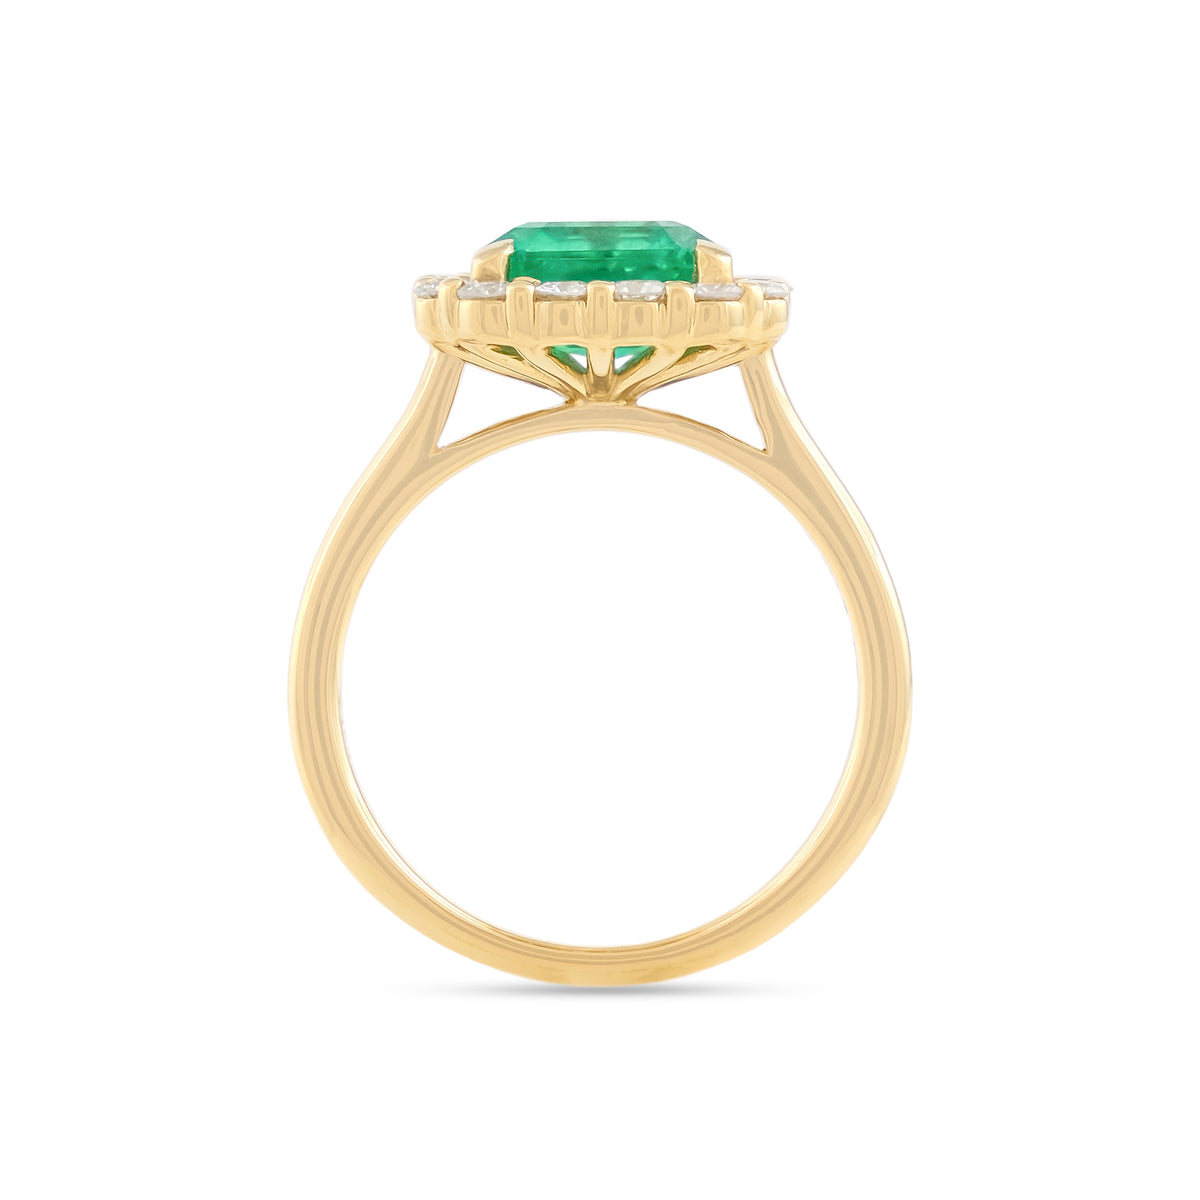 Vintage 18ct Yellow Gold Emerald and Diamond Ring